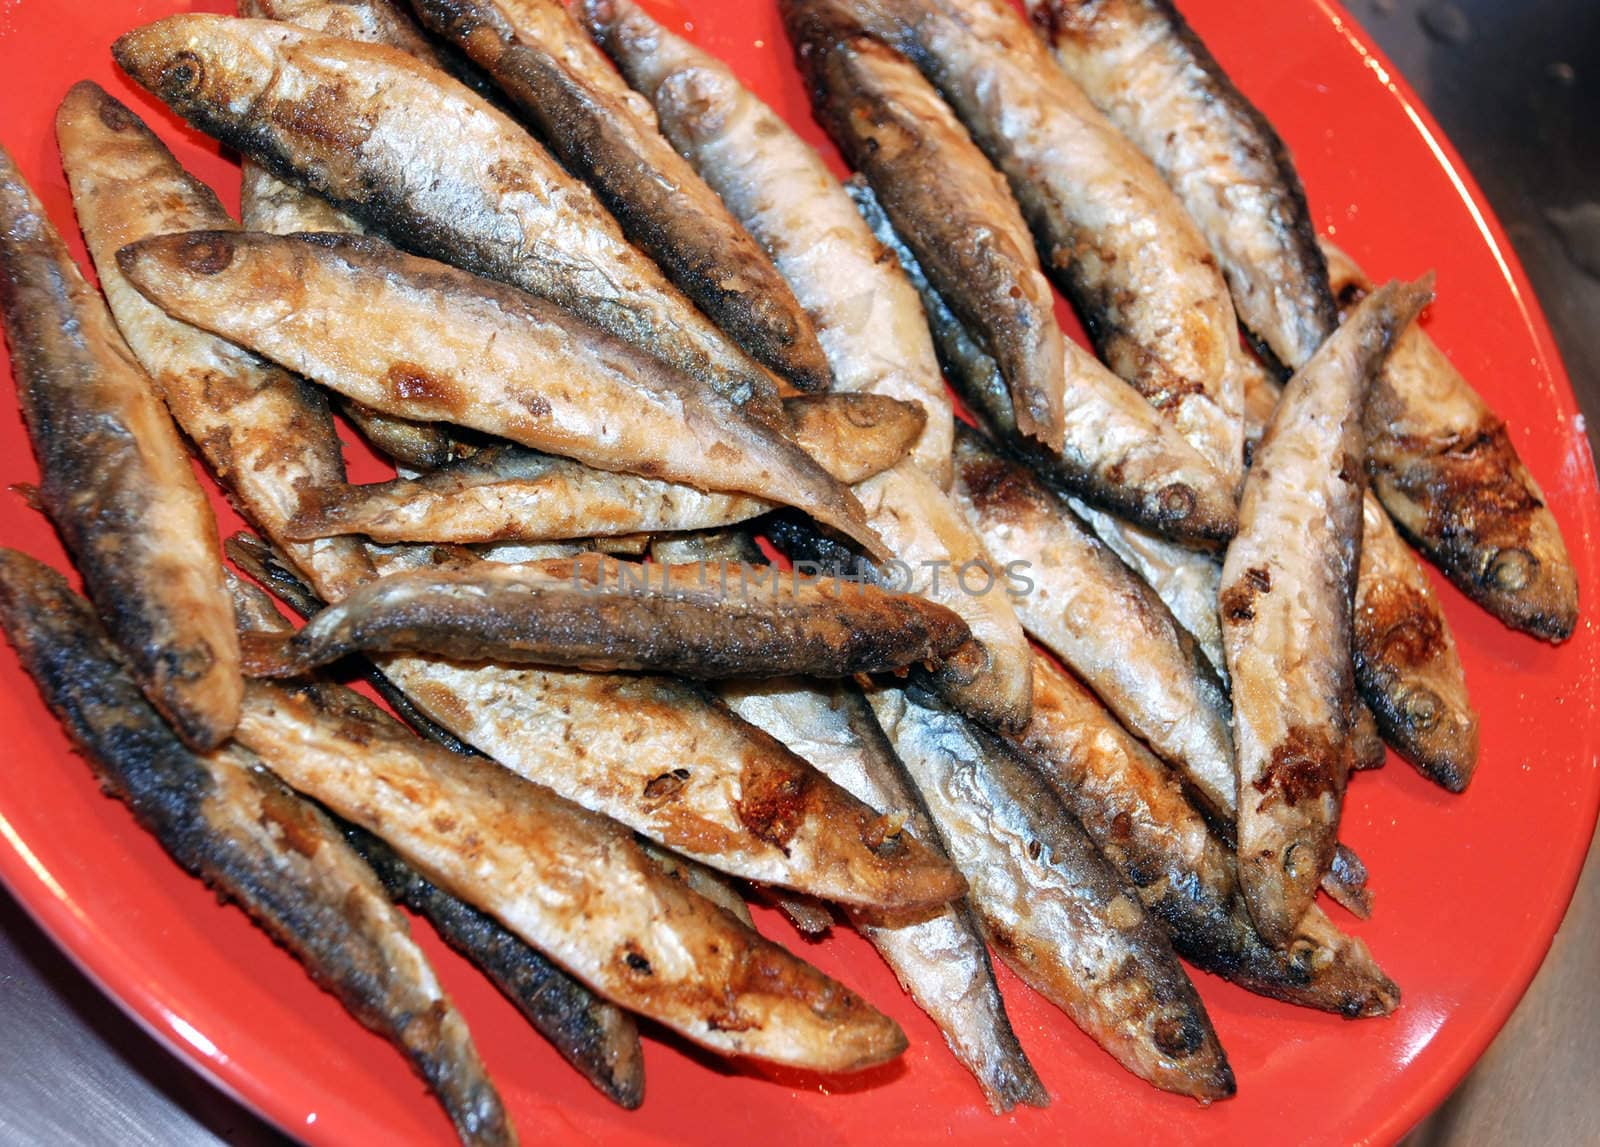 heap of small fried fish on red plate